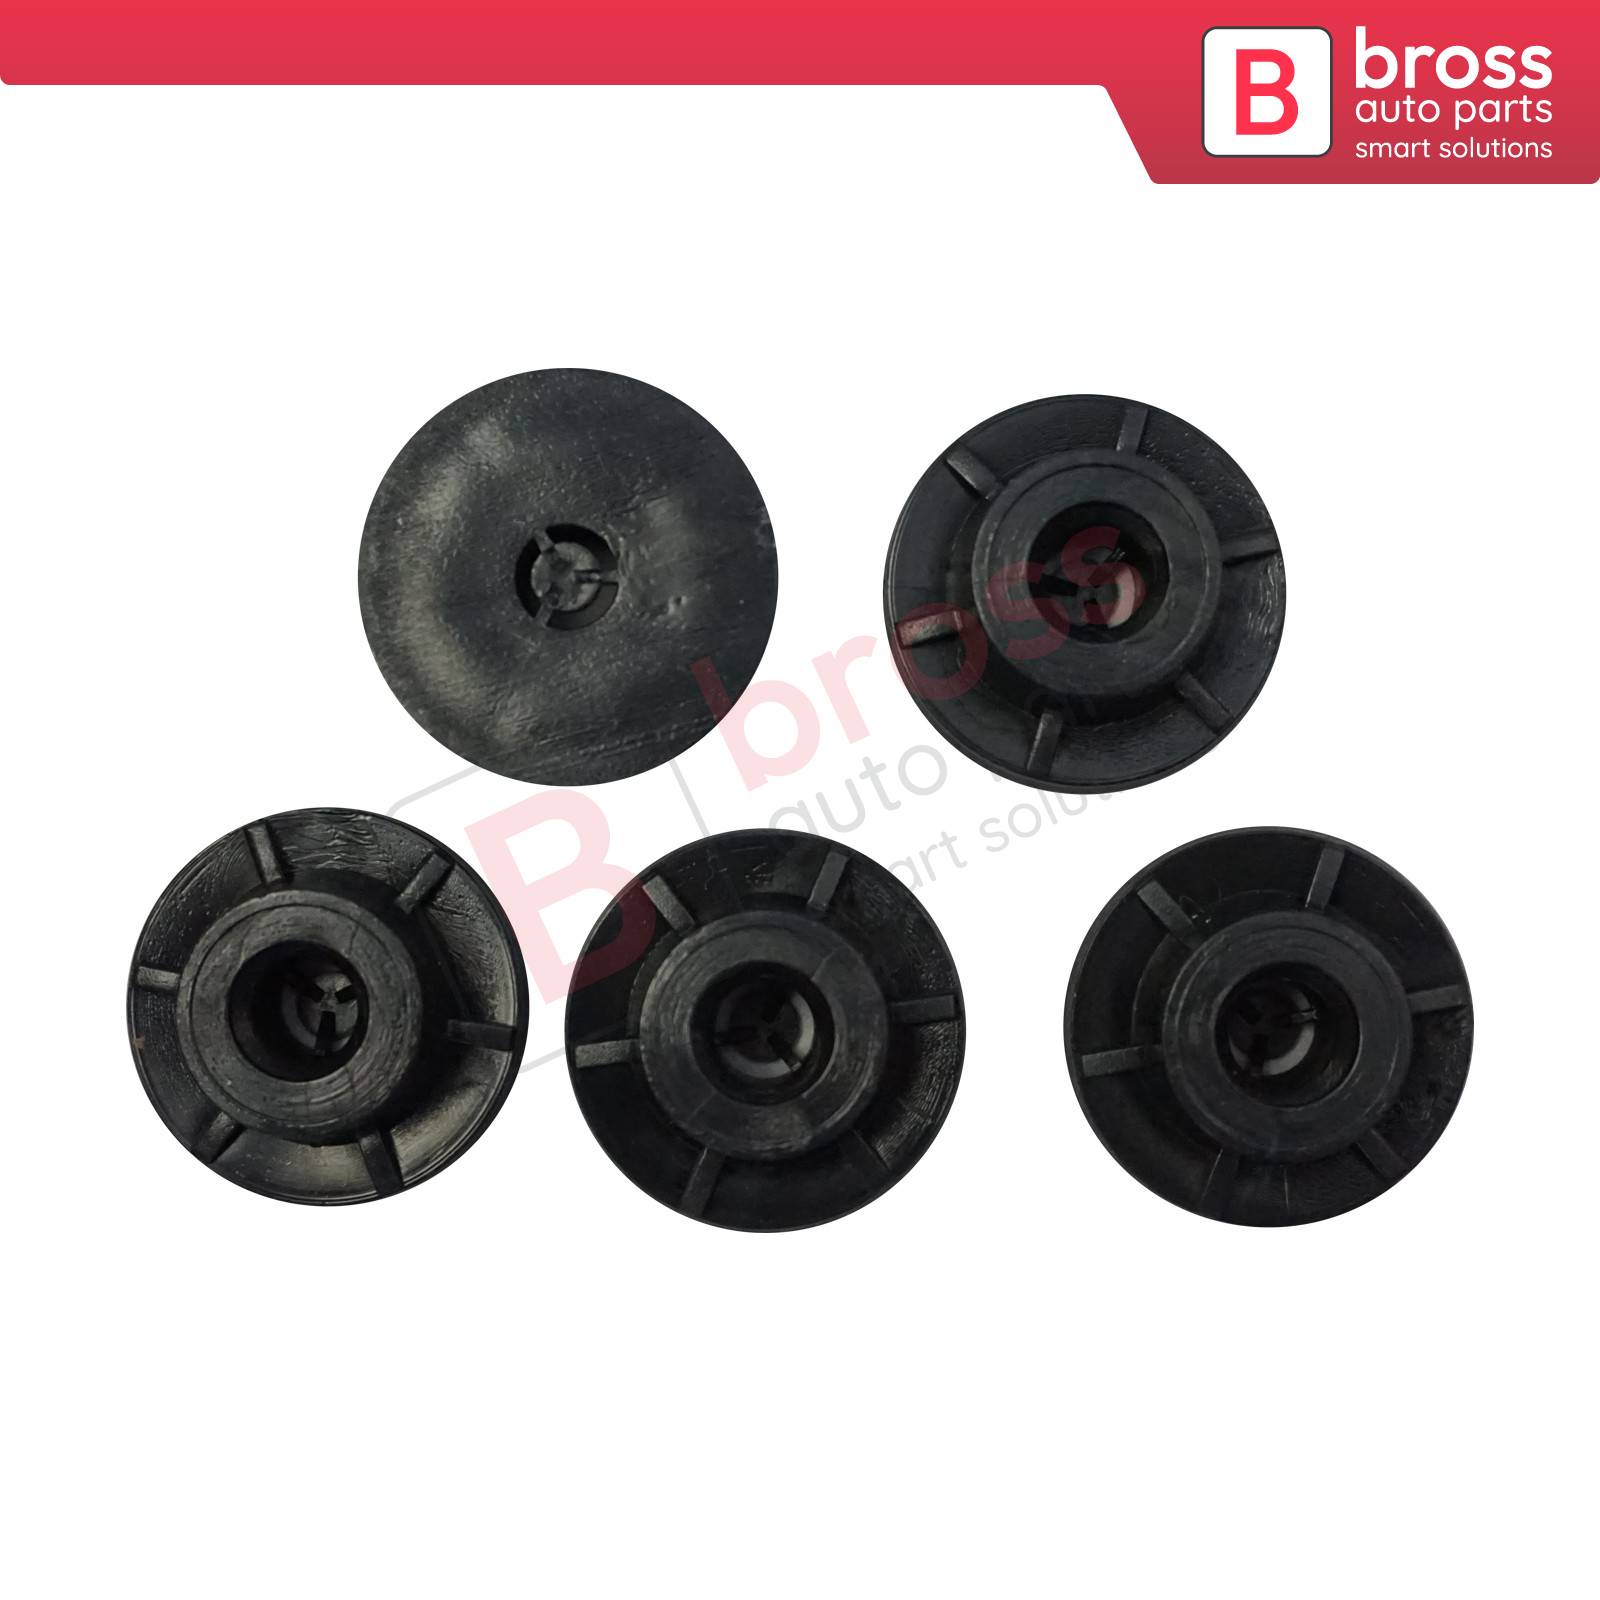 Bross Auto Parts - BCF5050 5 Pieces Seat Rail Bushing Clips 7700571983 for  Renault 9 11